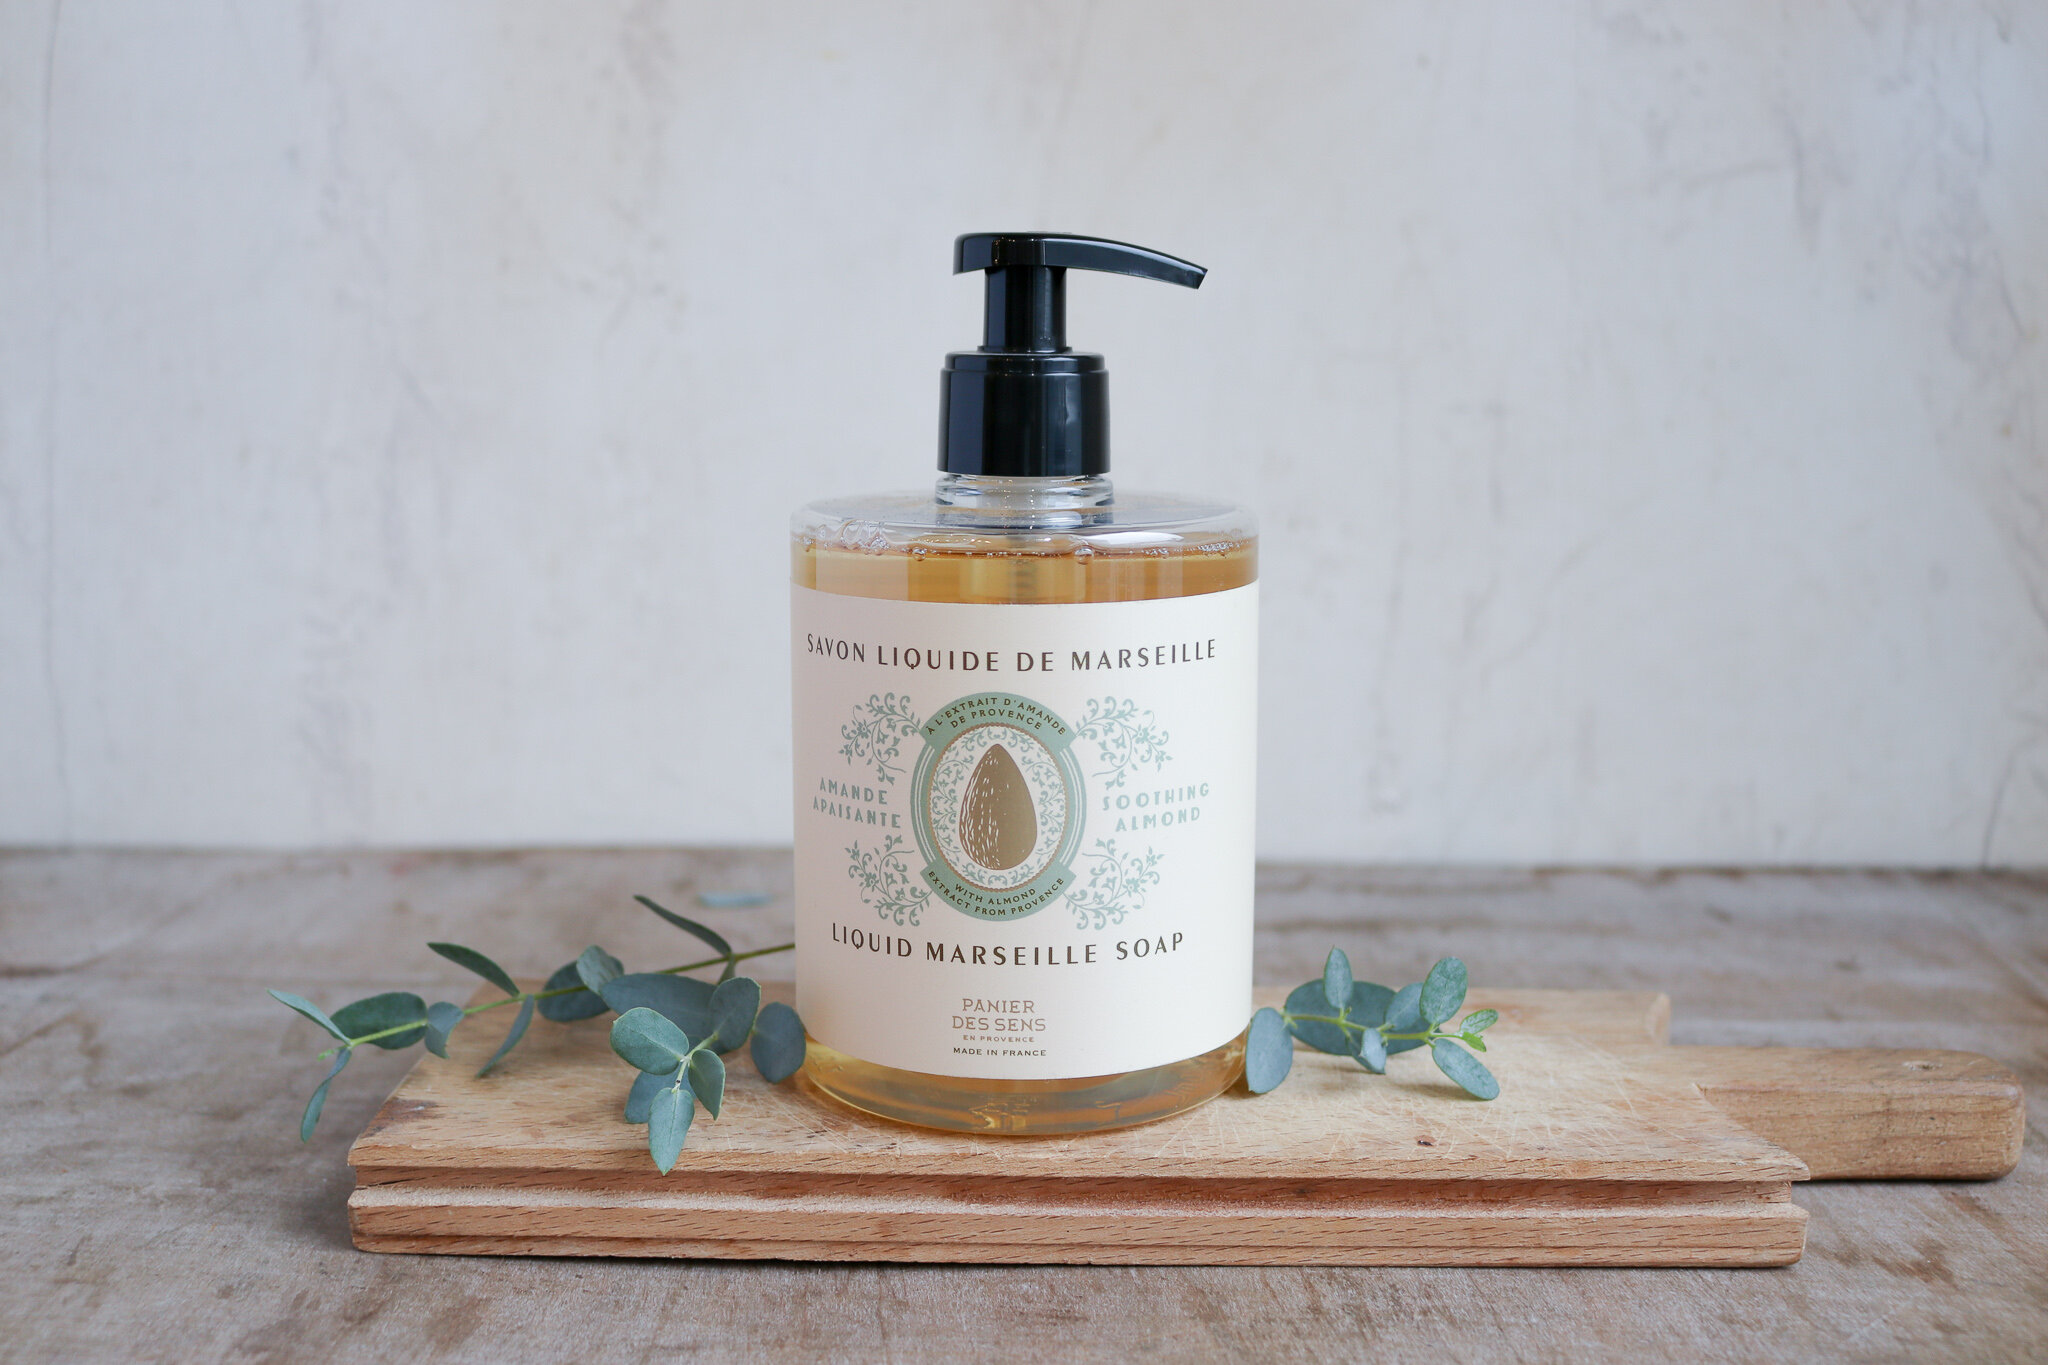 Exfoliating Soap  Liquid Marseille Soap from France